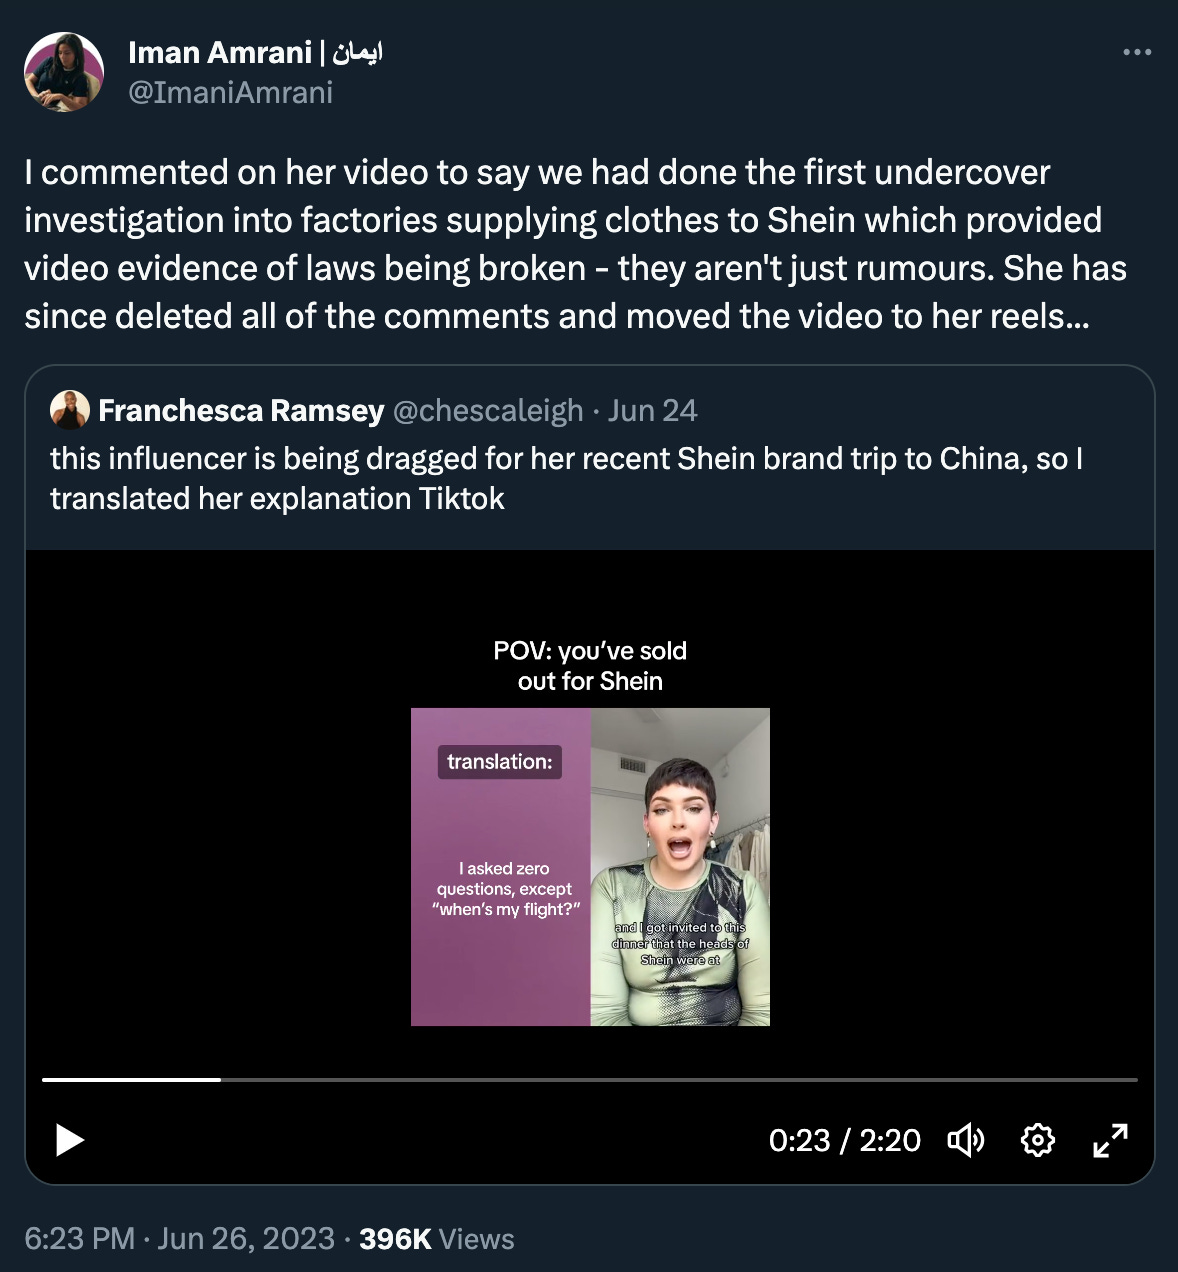 Iman Amrani tweeted: “I commented on her video to say we had done the first undercover investigation into factories supplying clothes to Shein which provided video evidence of laws being broken - they aren't just rumours. She has since deleted all of the comments and moved the video to her reels...” in a QT of a Tiktok “translating” one of Carbonari’s posts.